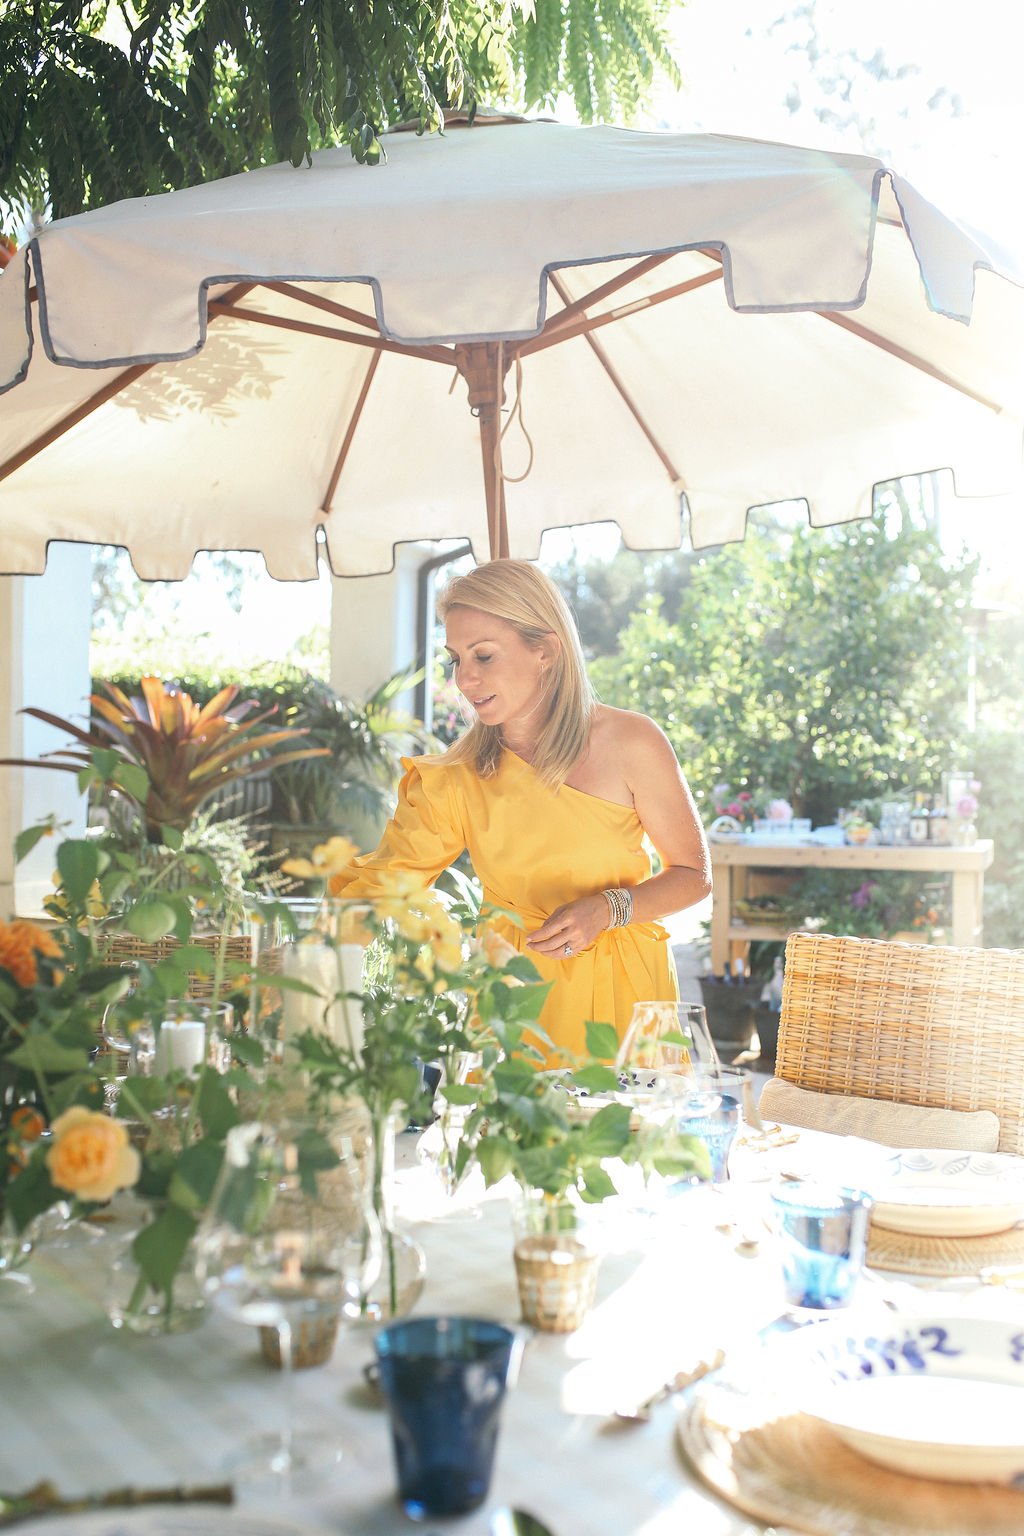 Valerie Rice dinner party, yellow dress, host, setting the table